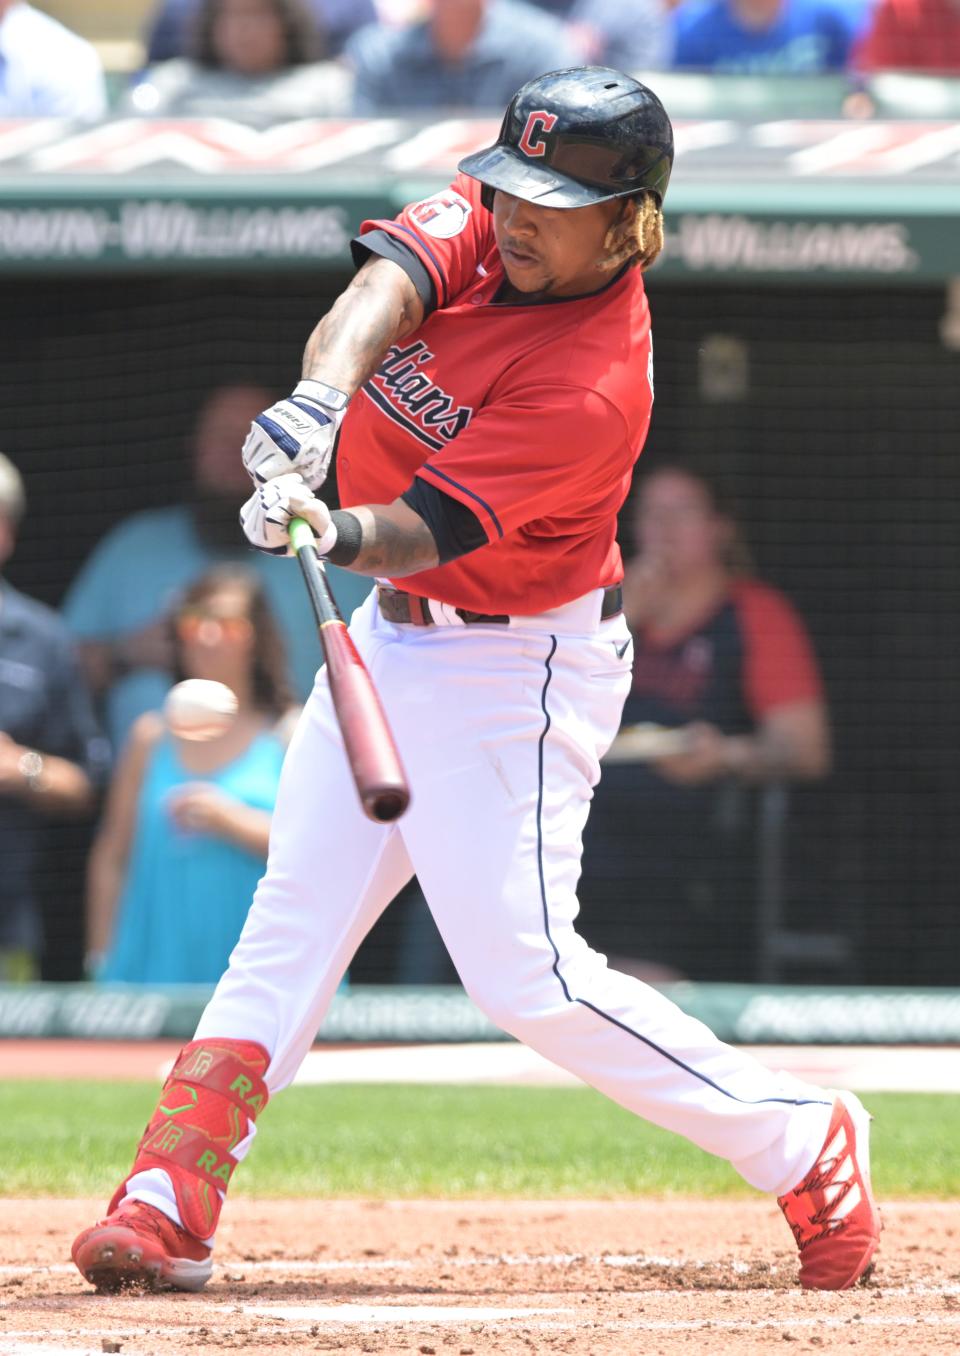 Guardians third baseman Jose Ramirez hits a single during the first inning against the Minnesota Twins, June 30, 2022, in Cleveland.